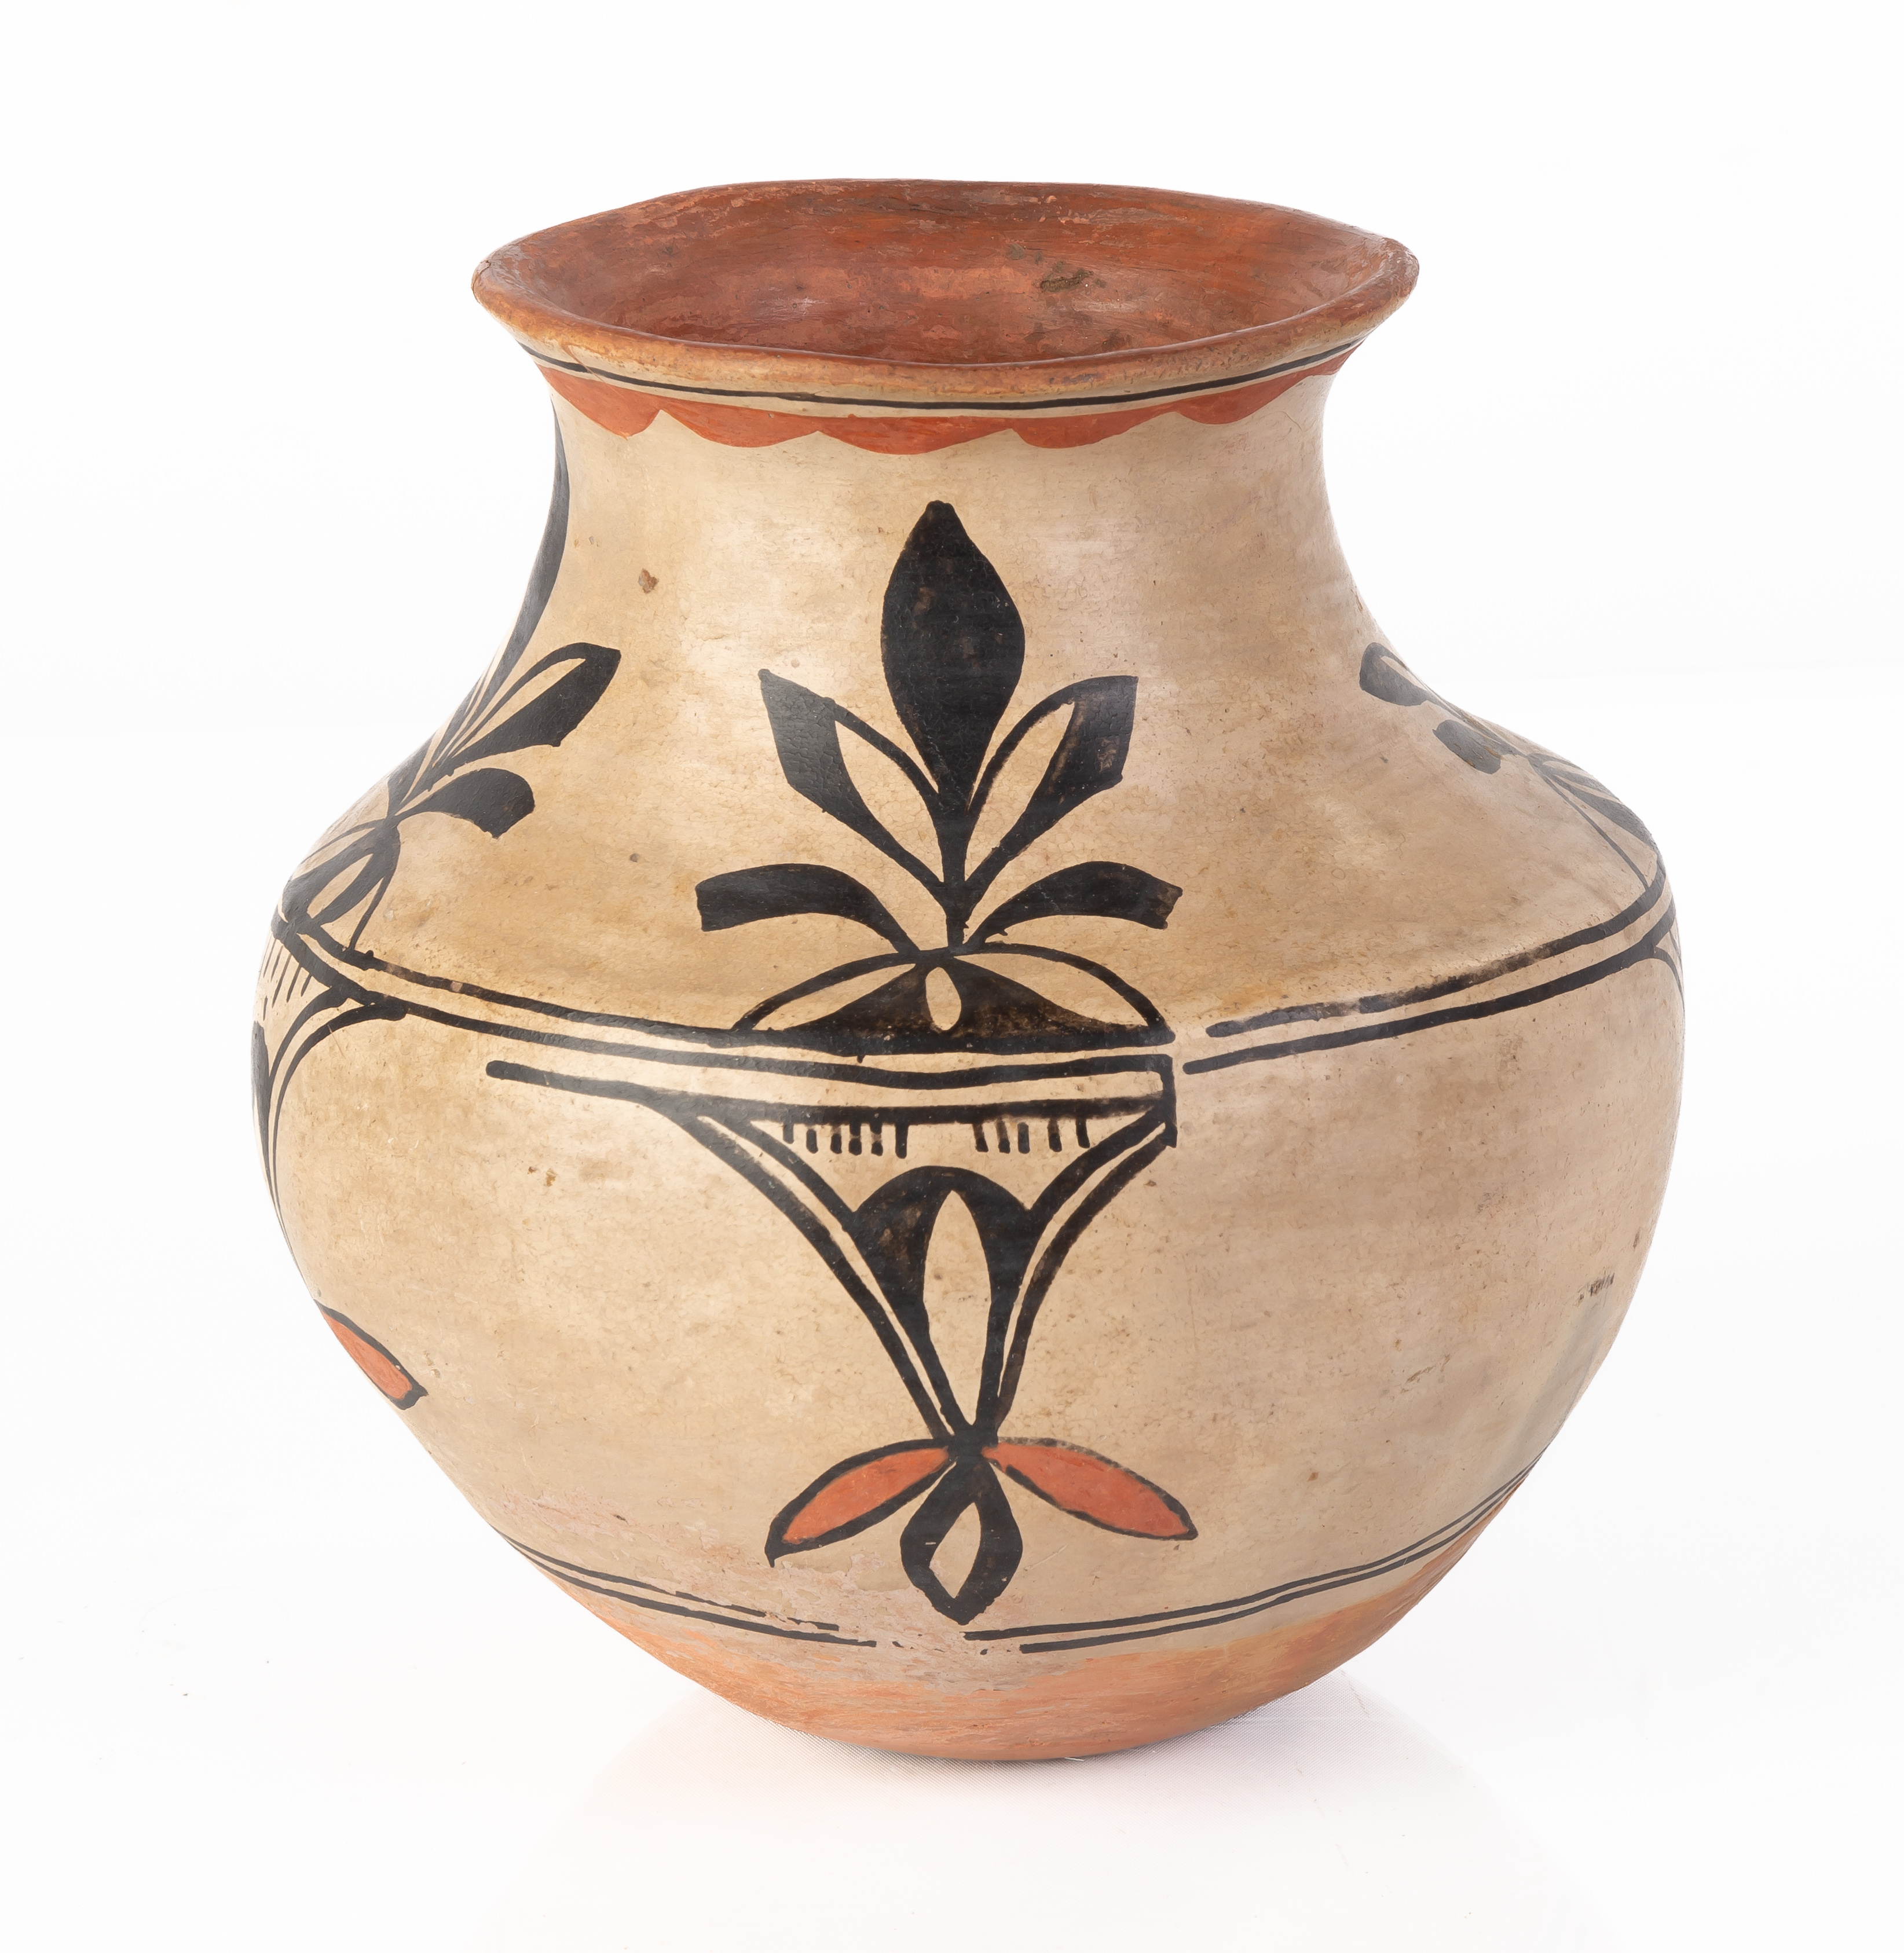 NATIVE AMERICAN DECORATED POT Early